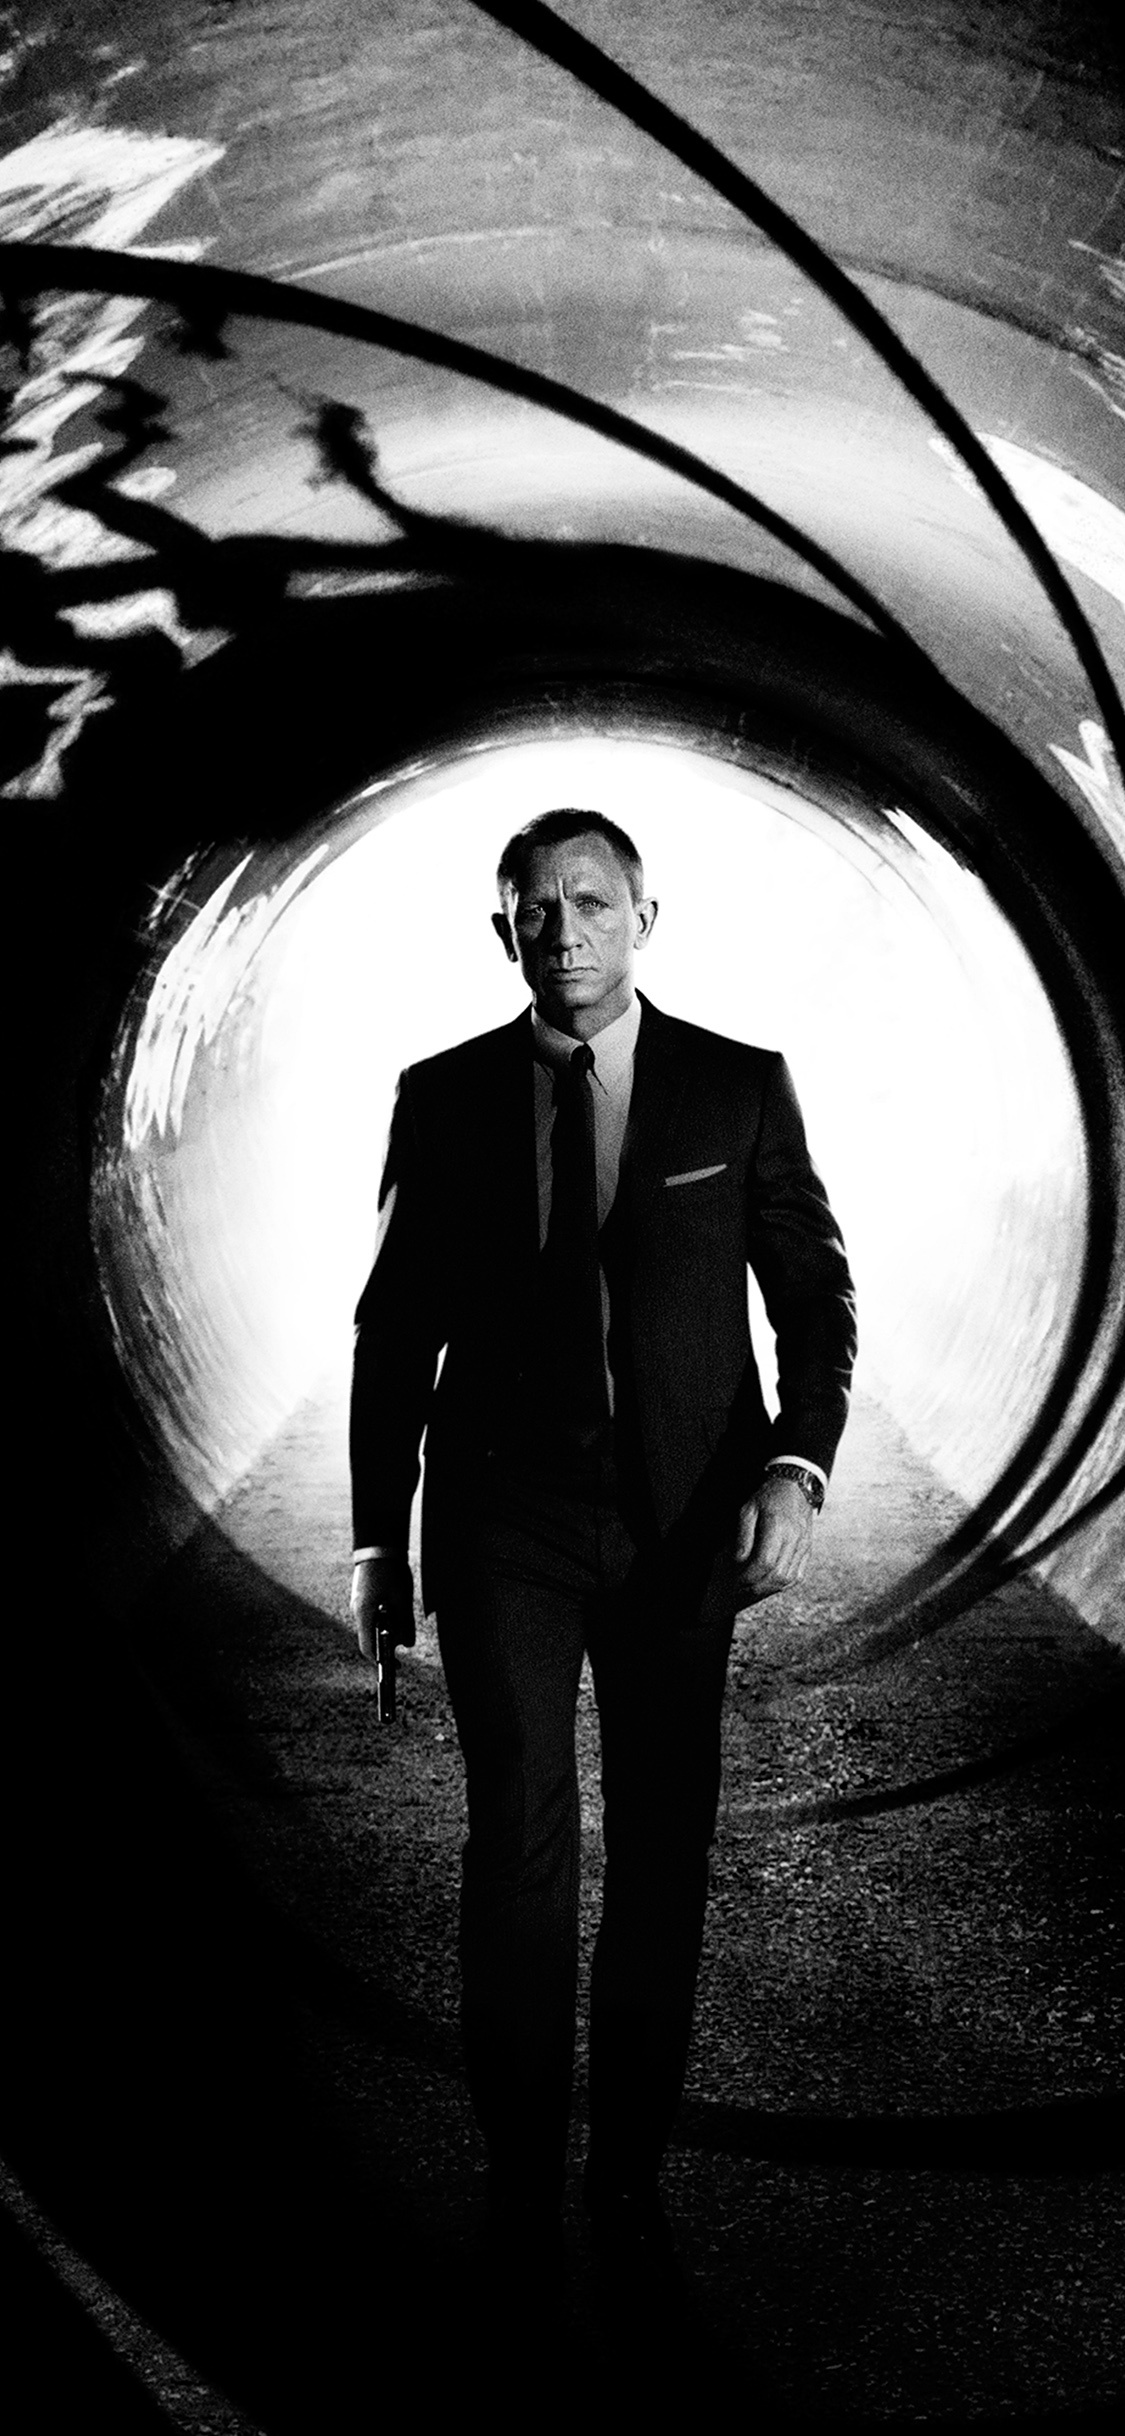 Skyfall: Bond investigating a series of targeted data leaks and co-ordinated attacks on MI6. 1130x2440 HD Wallpaper.